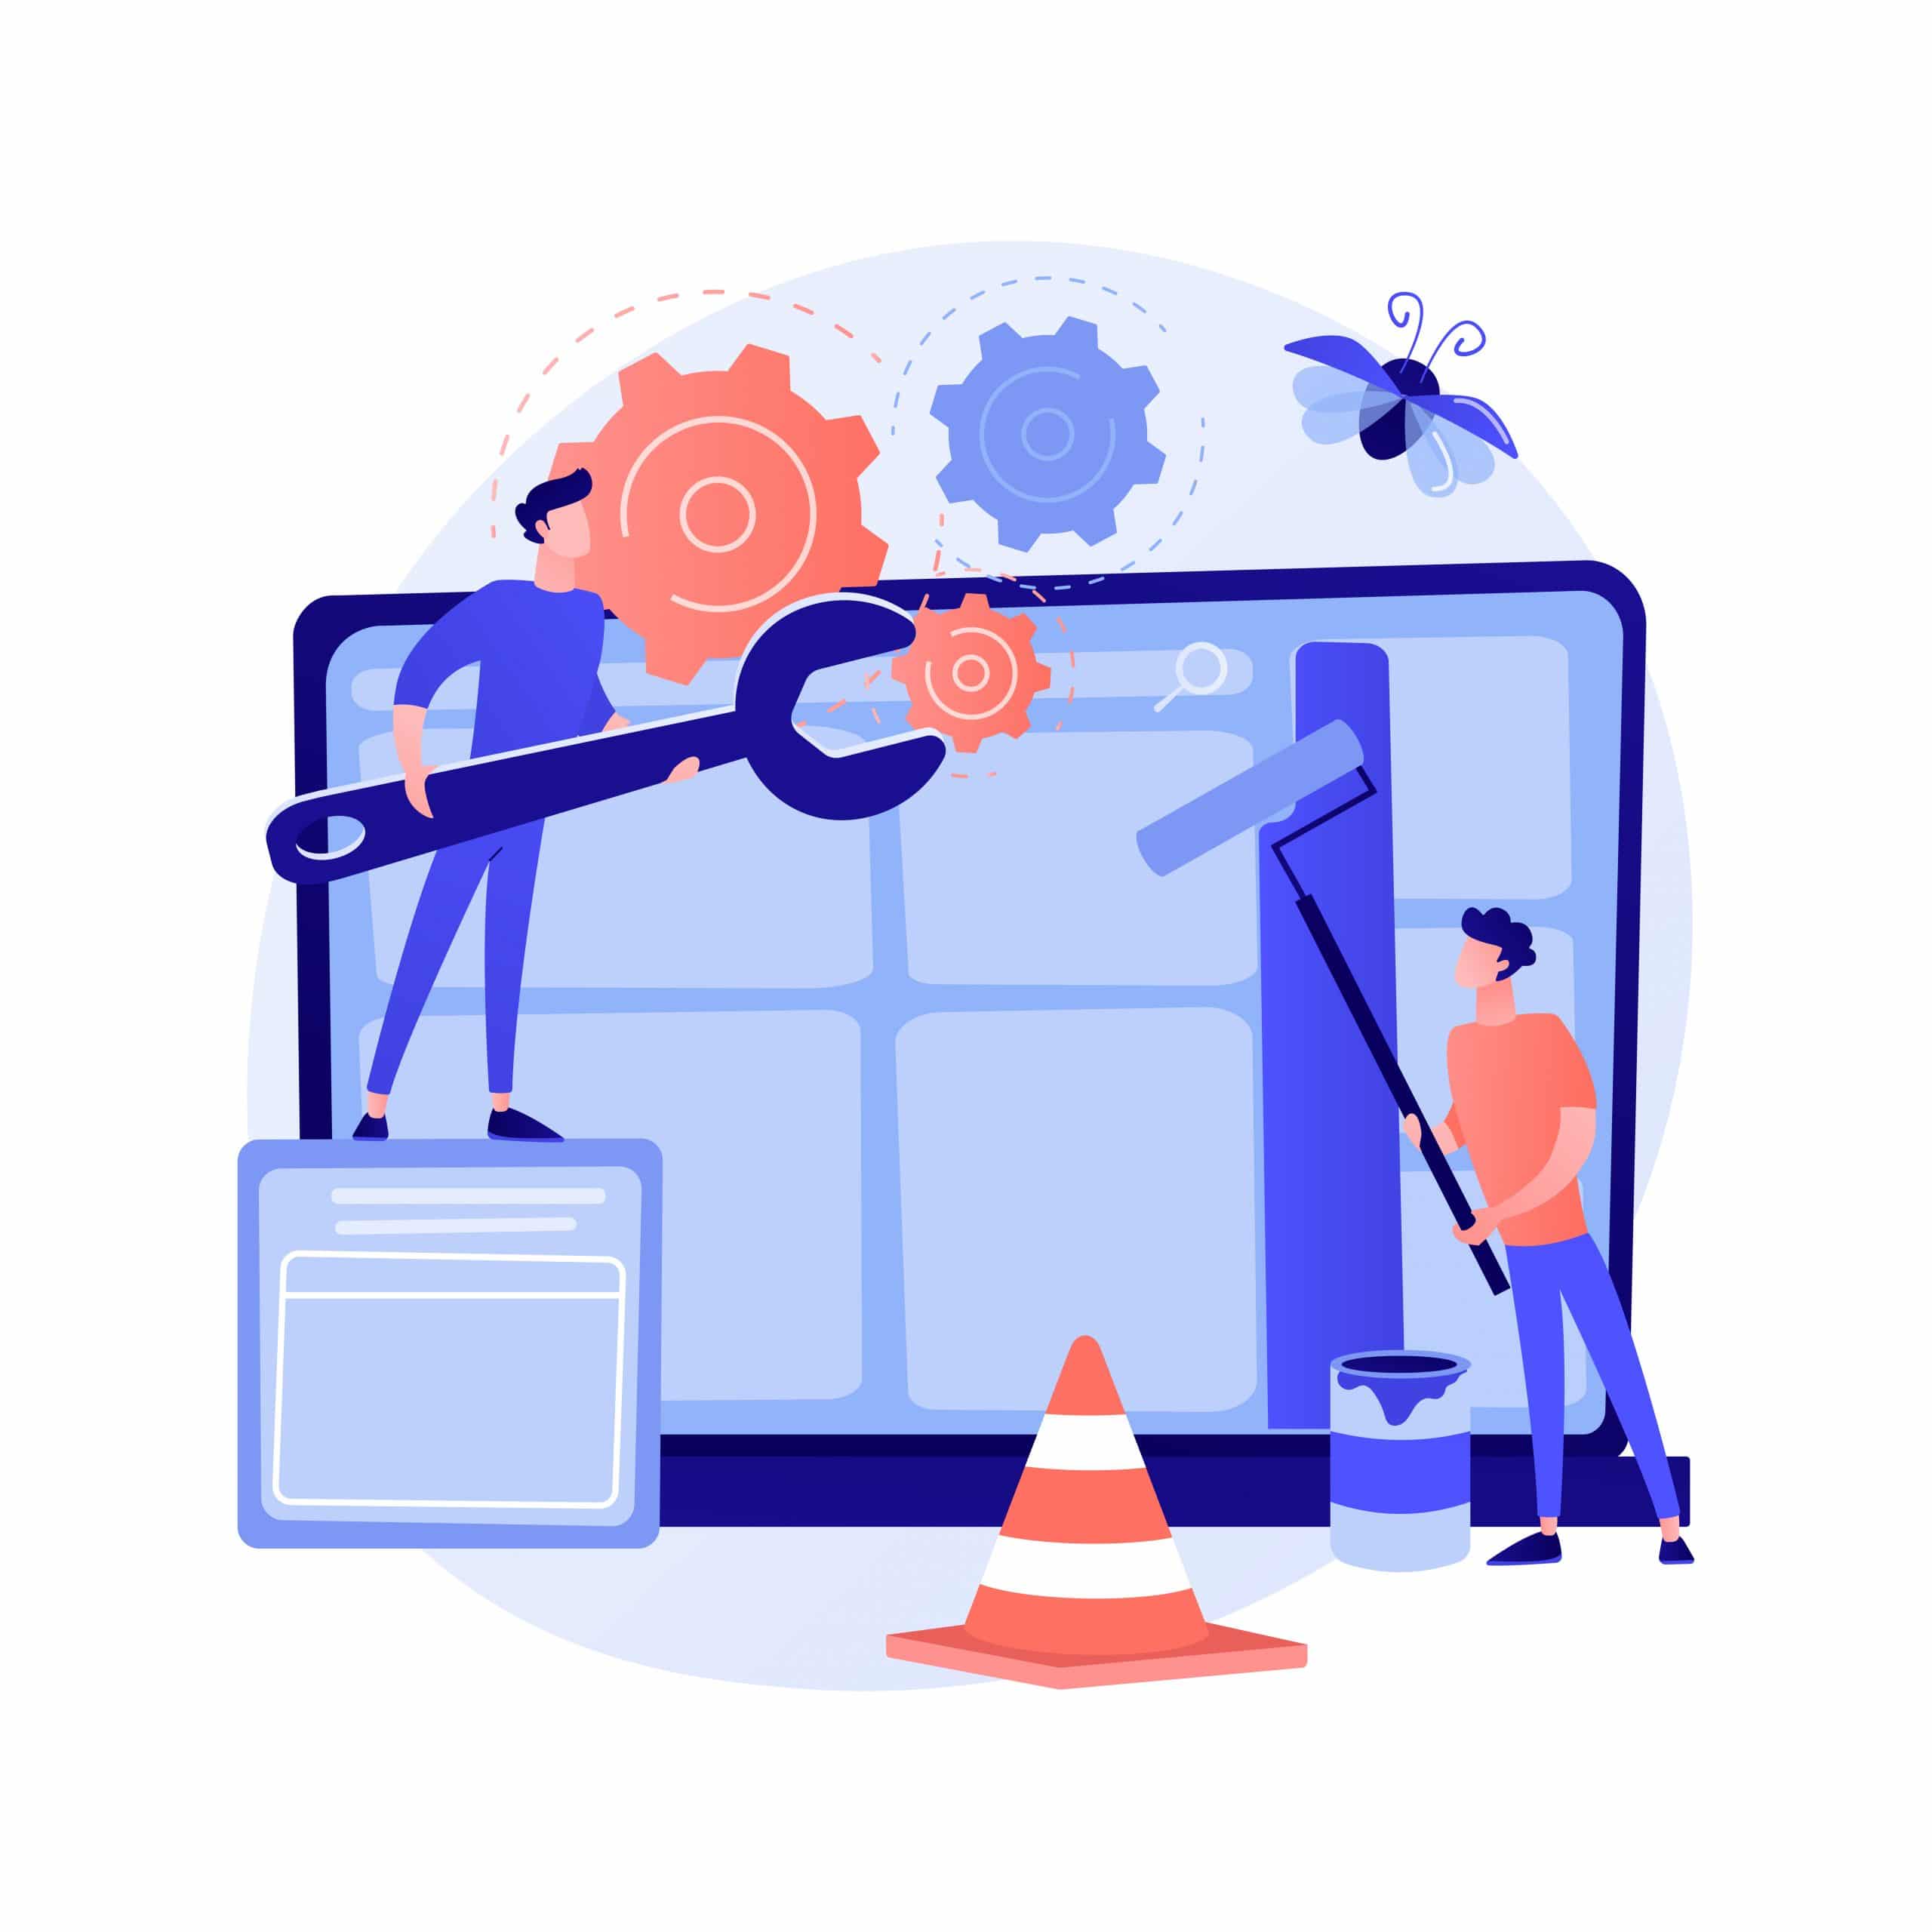 Website maintenance abstract concept vector illustration. Website service, webpage seo maintenance, web design, corporate site professional support, security analysis, update abstract metaphor.